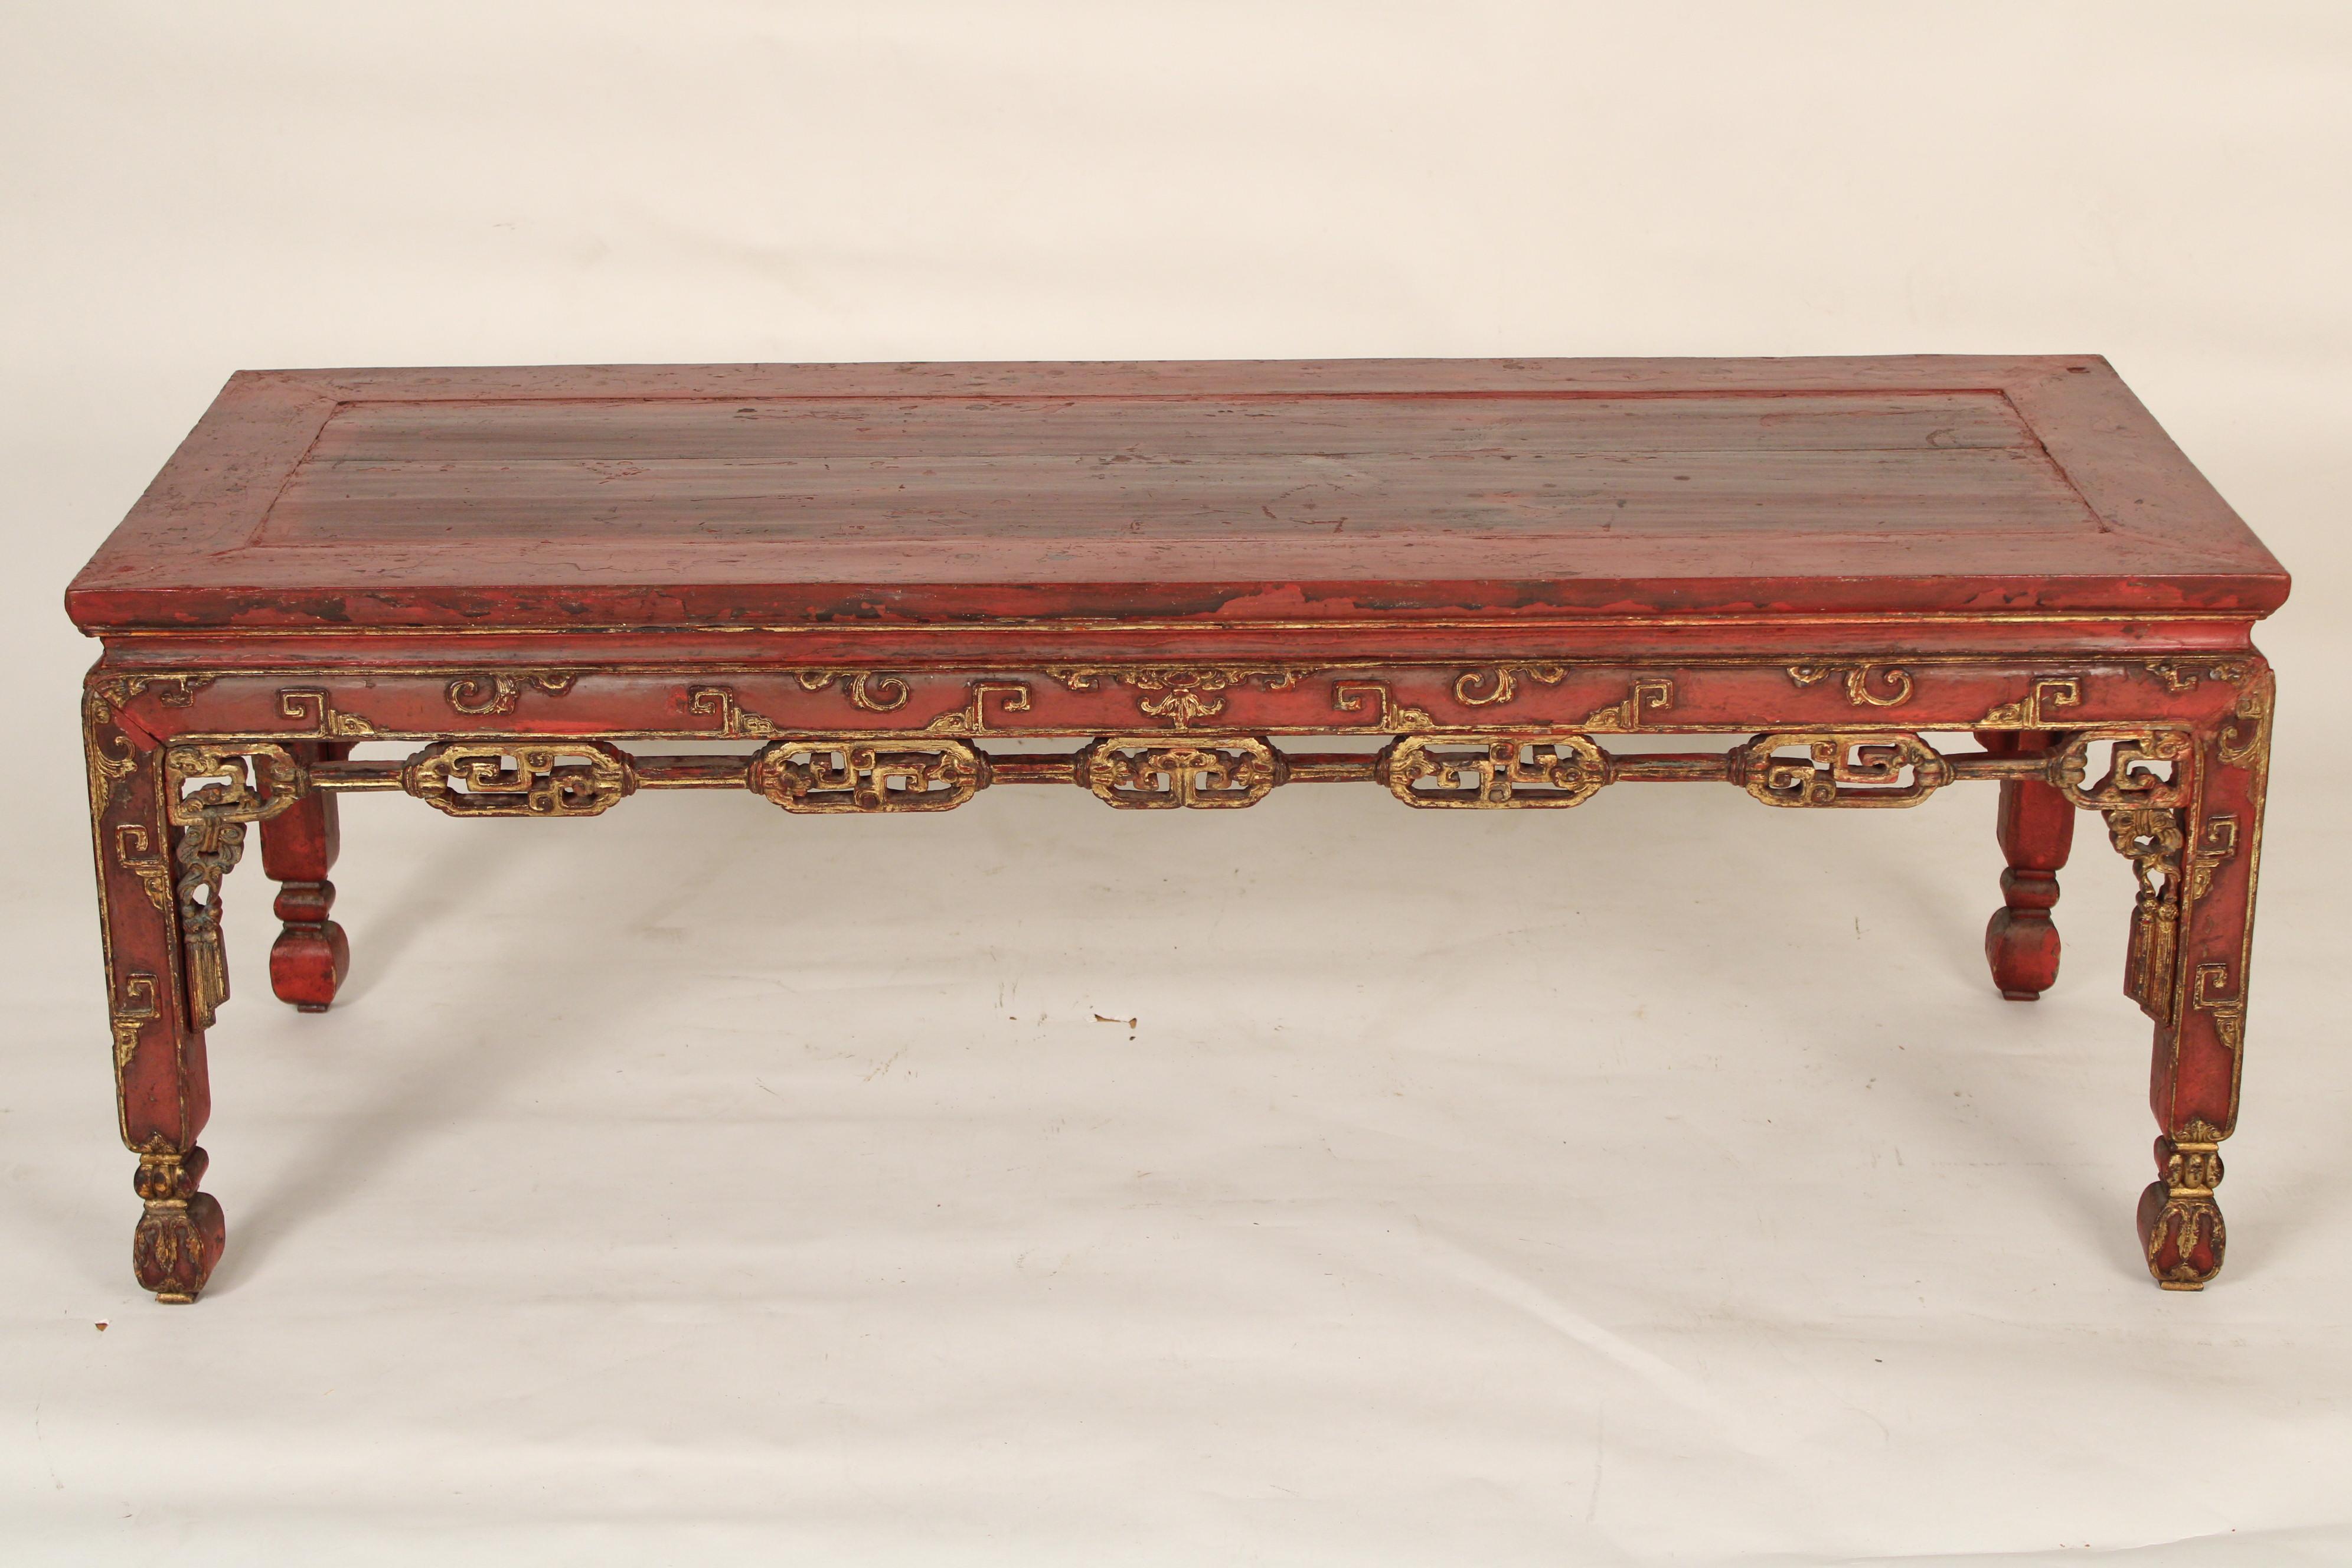 Chinese red painted coffee table with gilt highlights, circa 1930's. With a slightly over hanging rectangular top a frieze with gilt highlights, resting on square legs with gilt decoration.